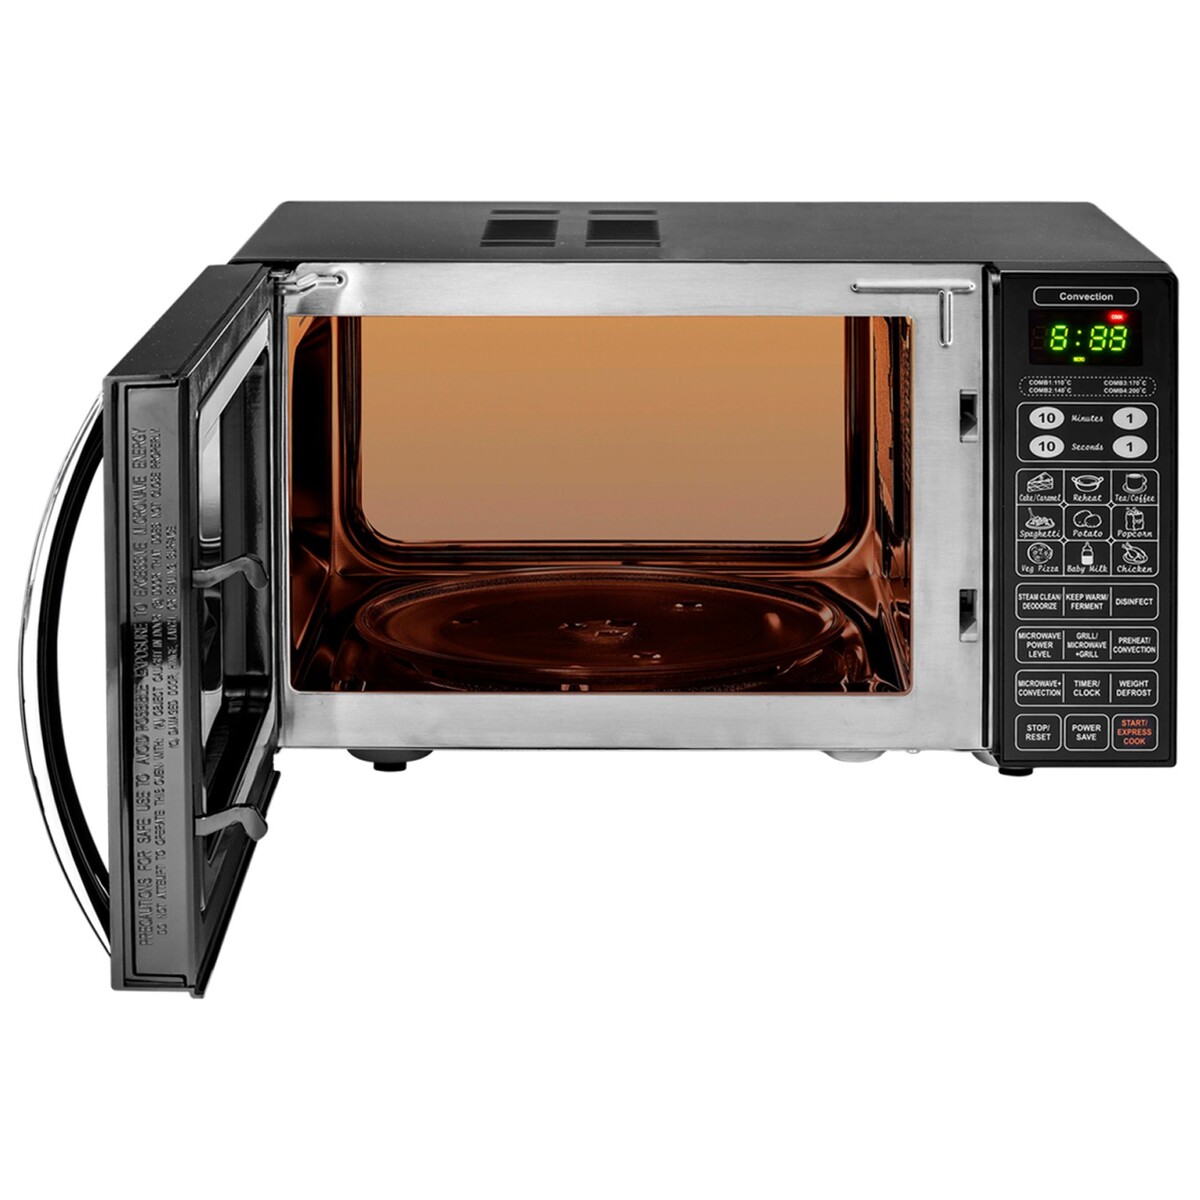 IFB Microwave Oven 23BC4 23 Litre